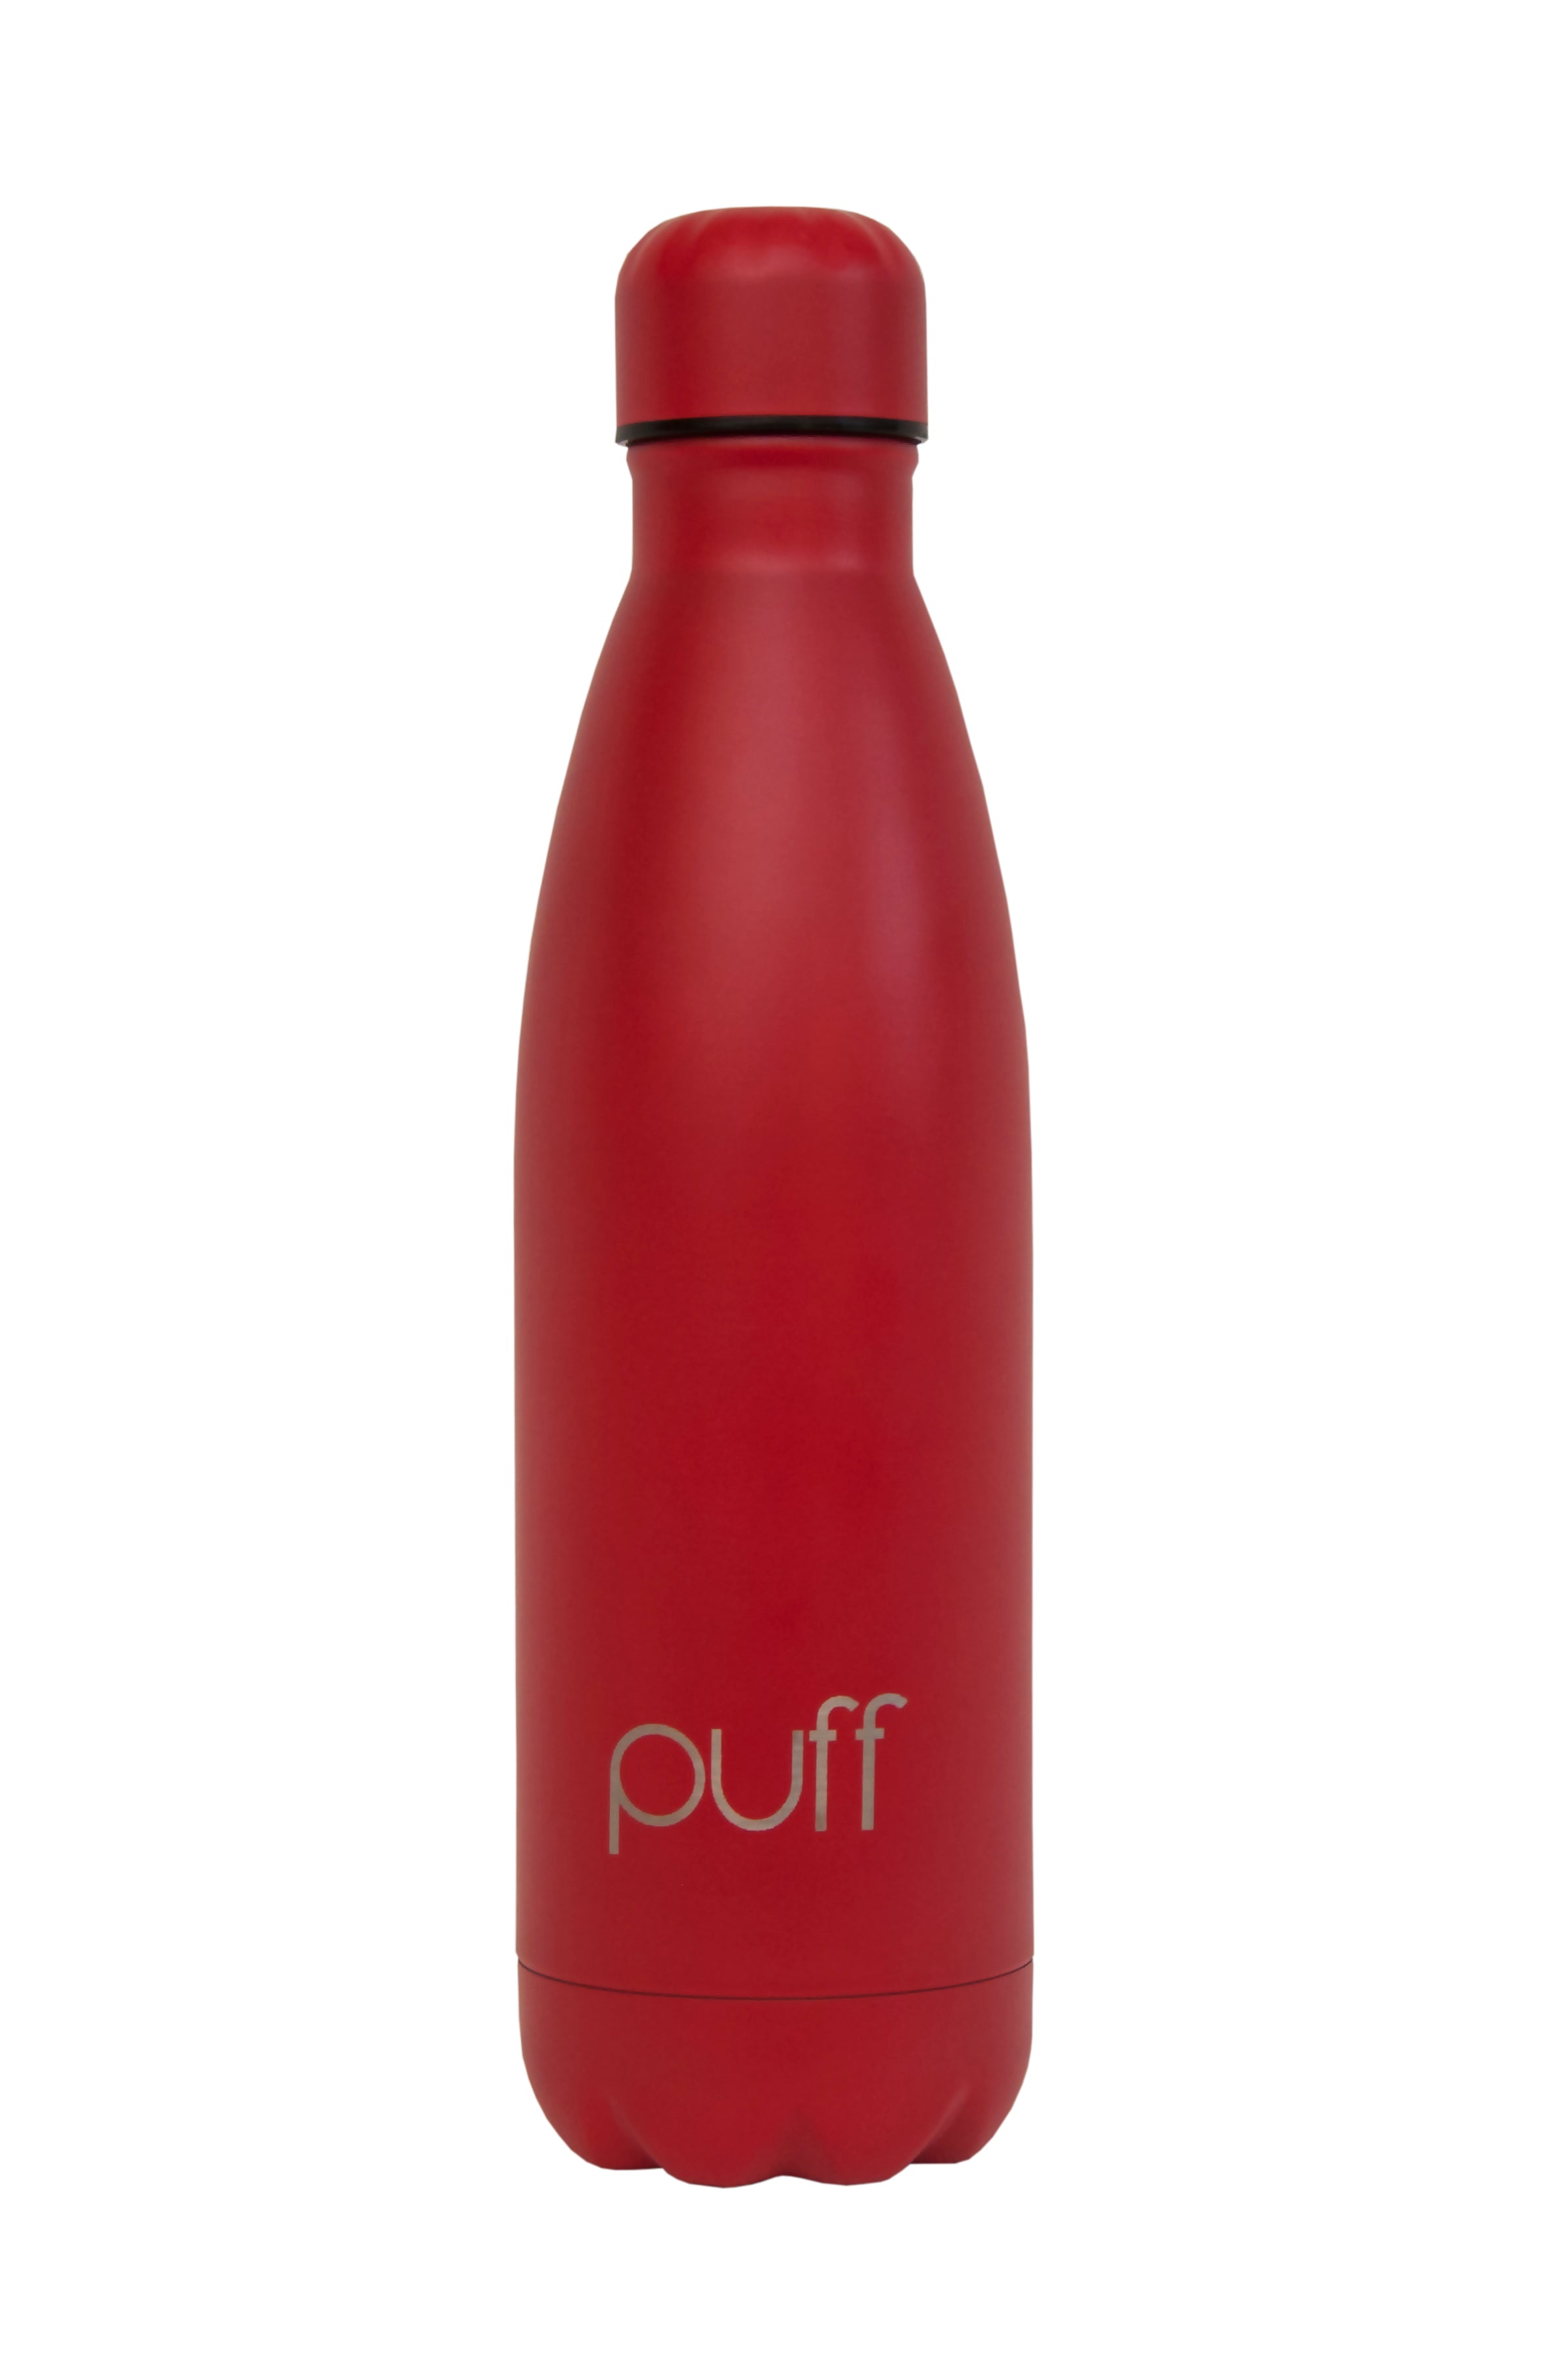 puff | Matte Red Stainless Steel Bottle. "750ml"